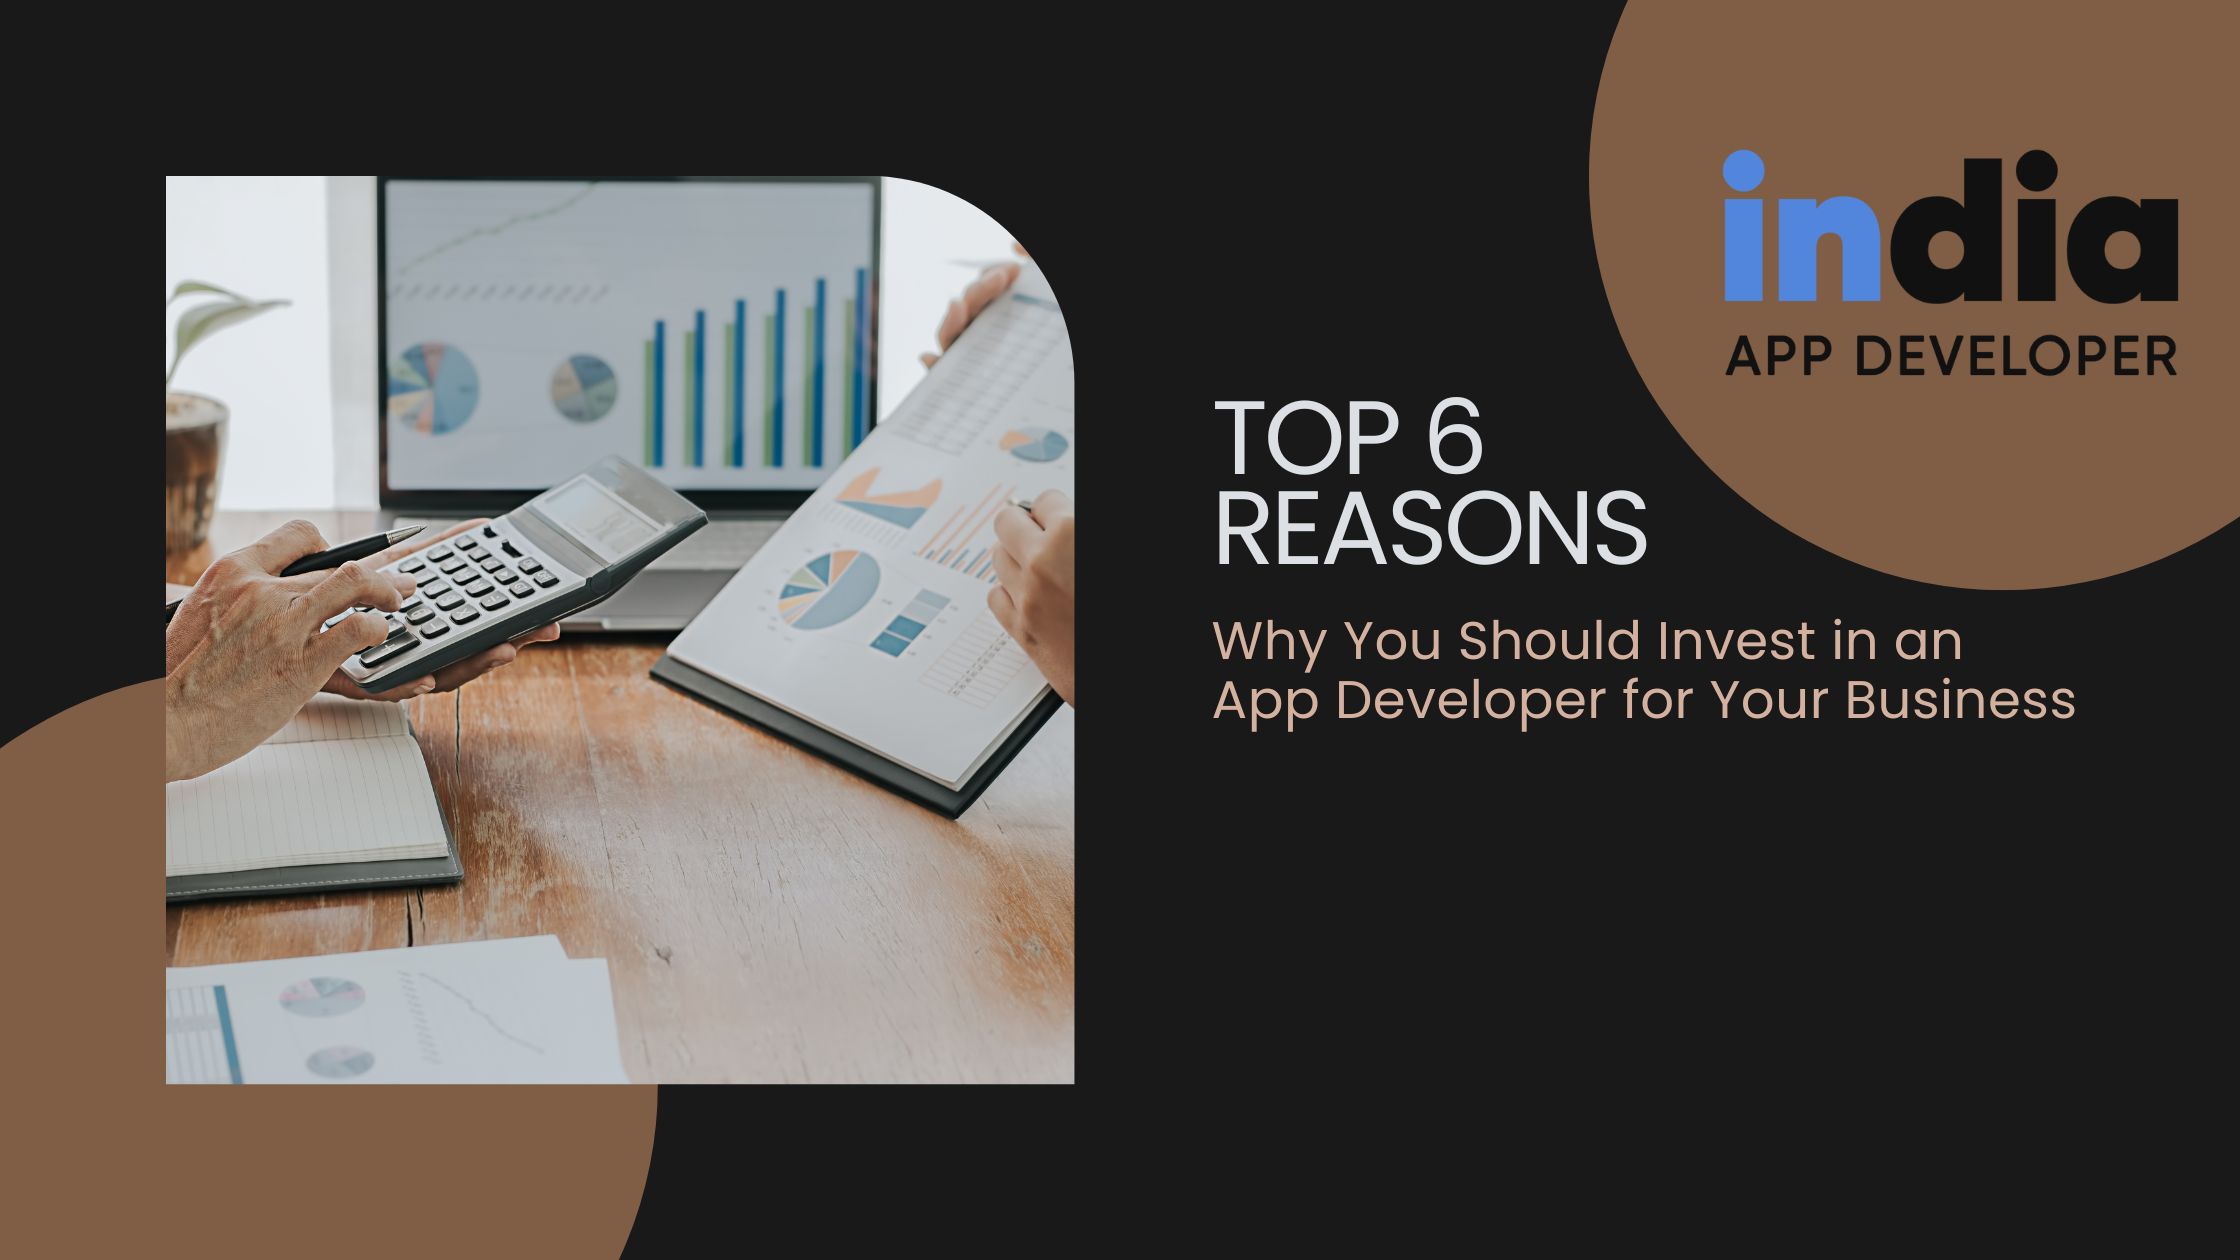 Top 6 Reasons Why You Should Invest in an App Developer for Your Business